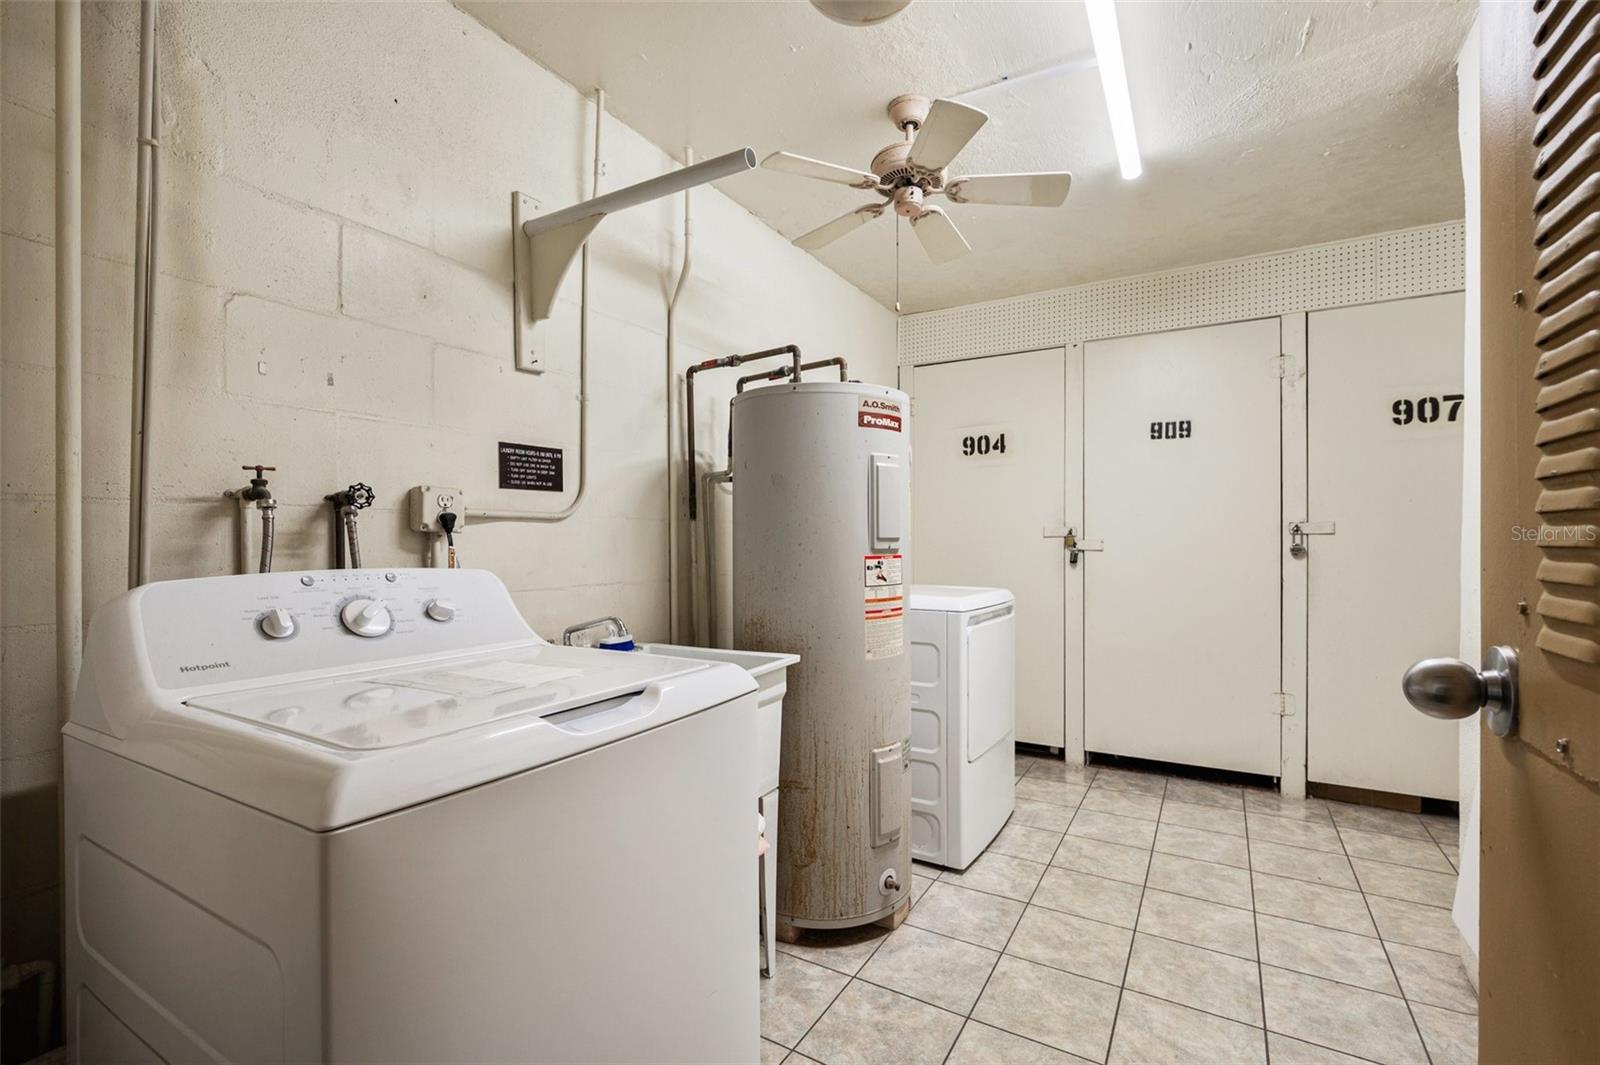 Laundry room on every floor.Each unit has a storage room